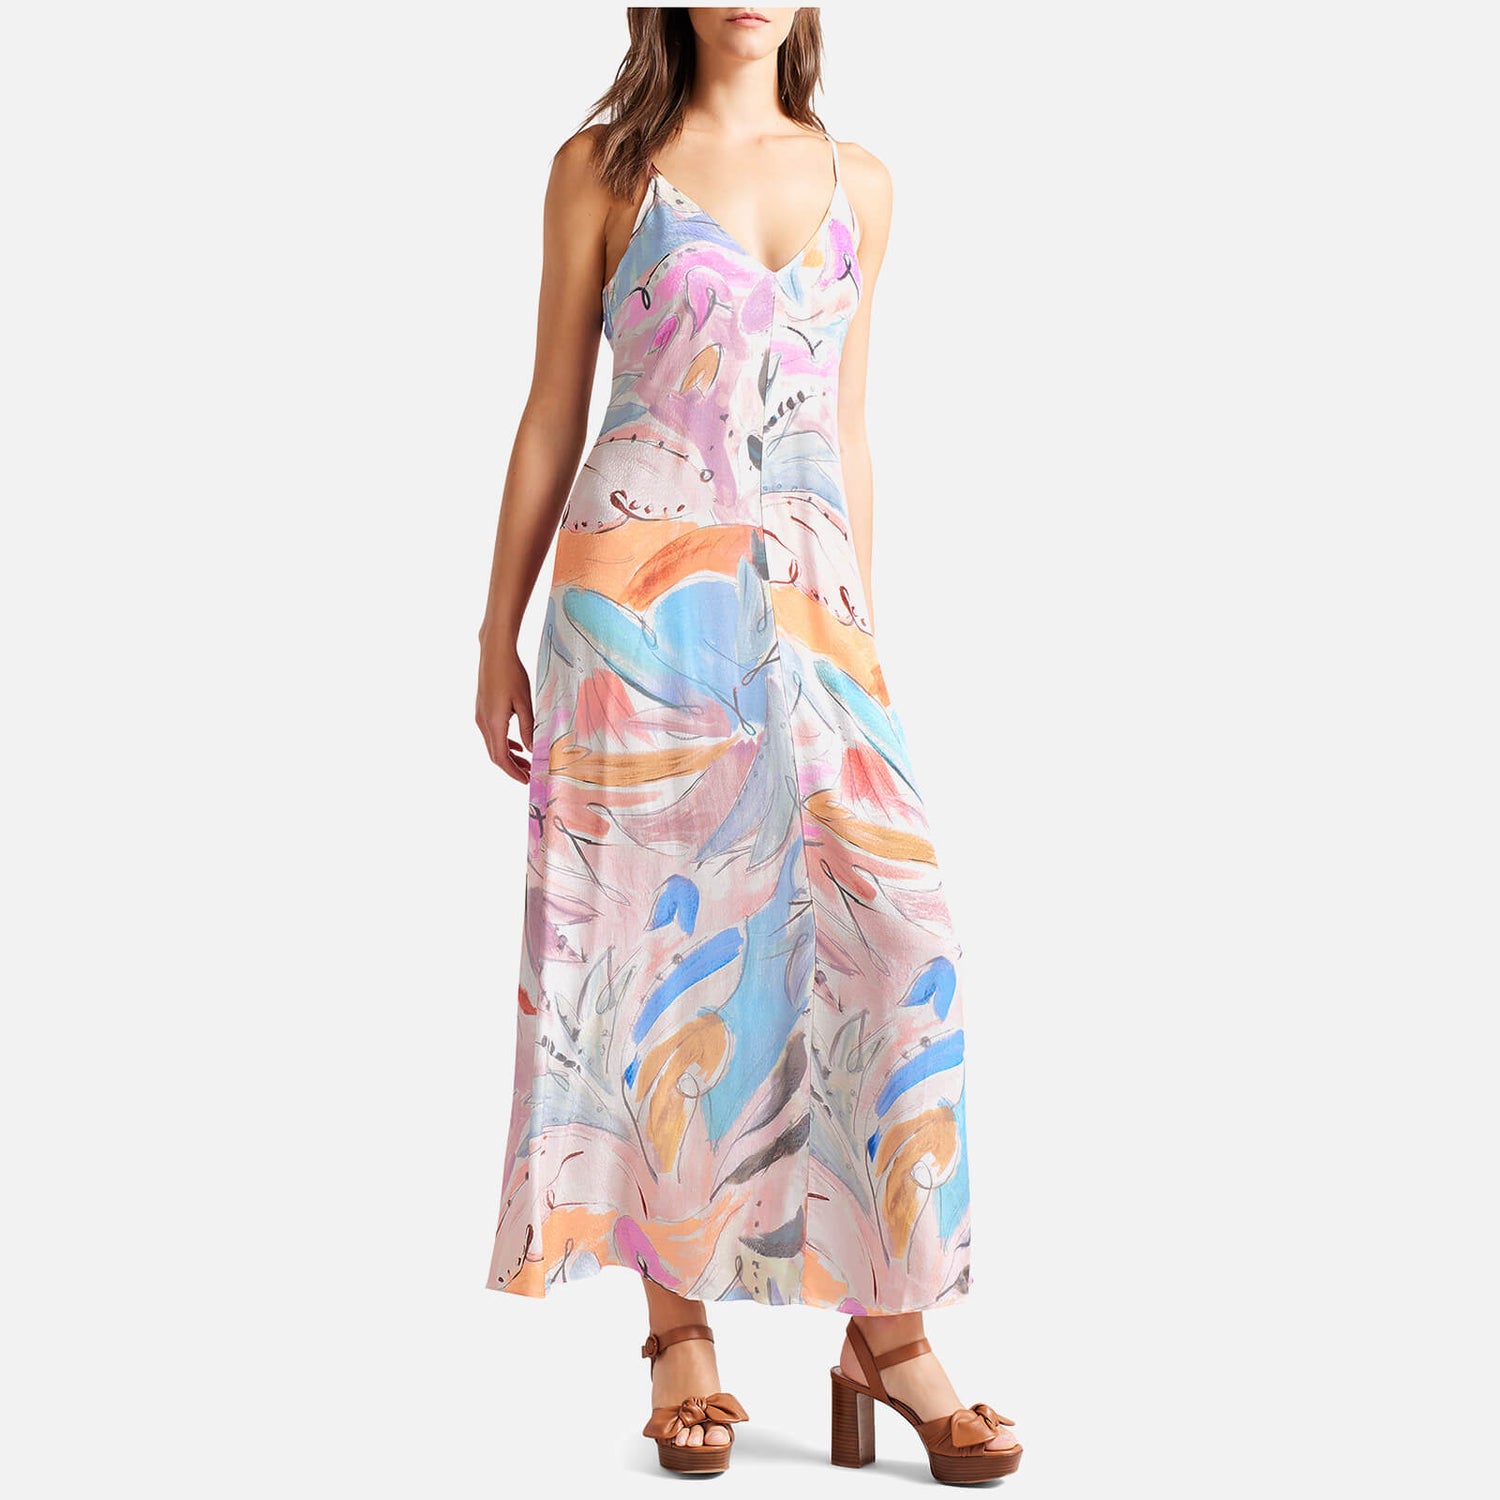 Ted Baker Lizybet Abstract Floral Print Crepe dress - UK 6